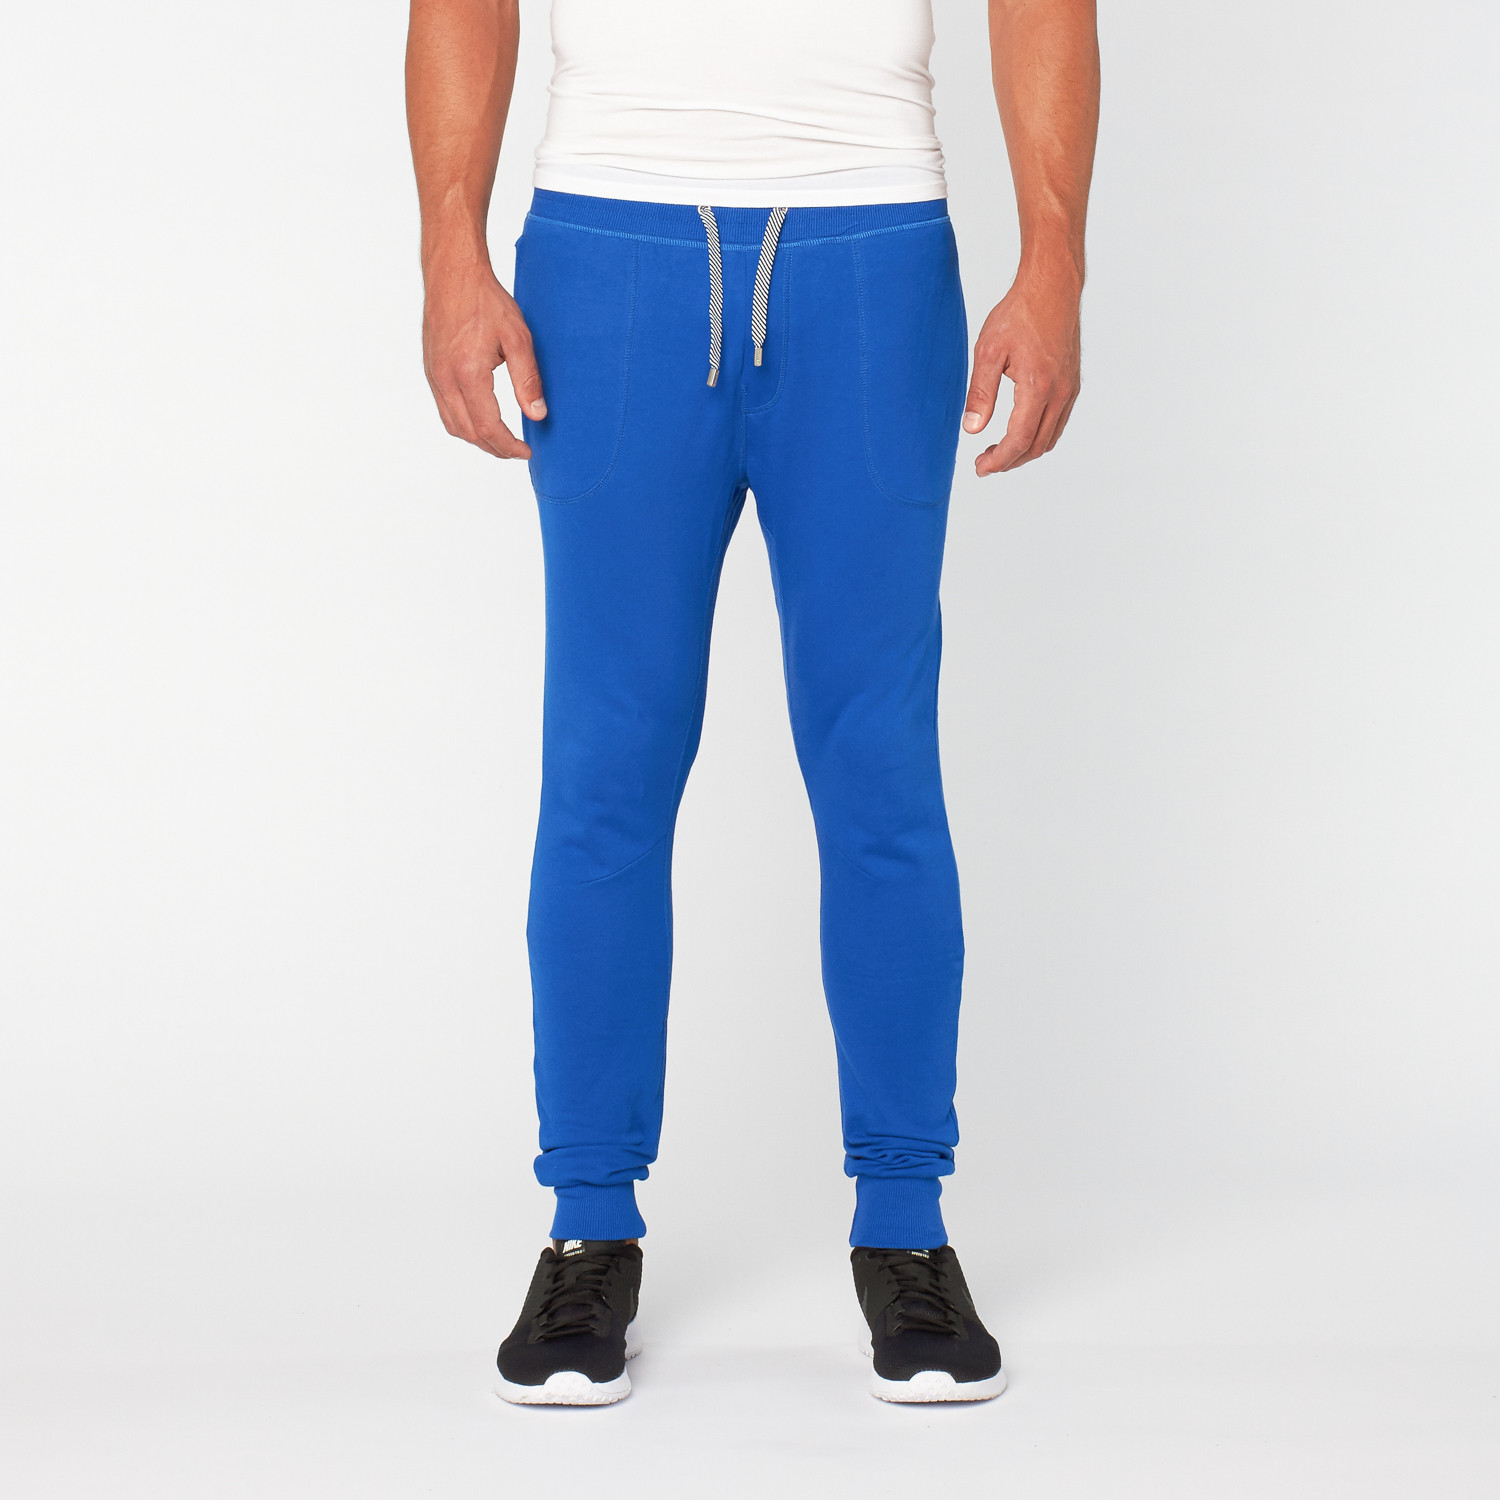 Teamm8 // Rider Sweat Pant // Brilliant Blue (XS) - Teamm8 - Touch of ...